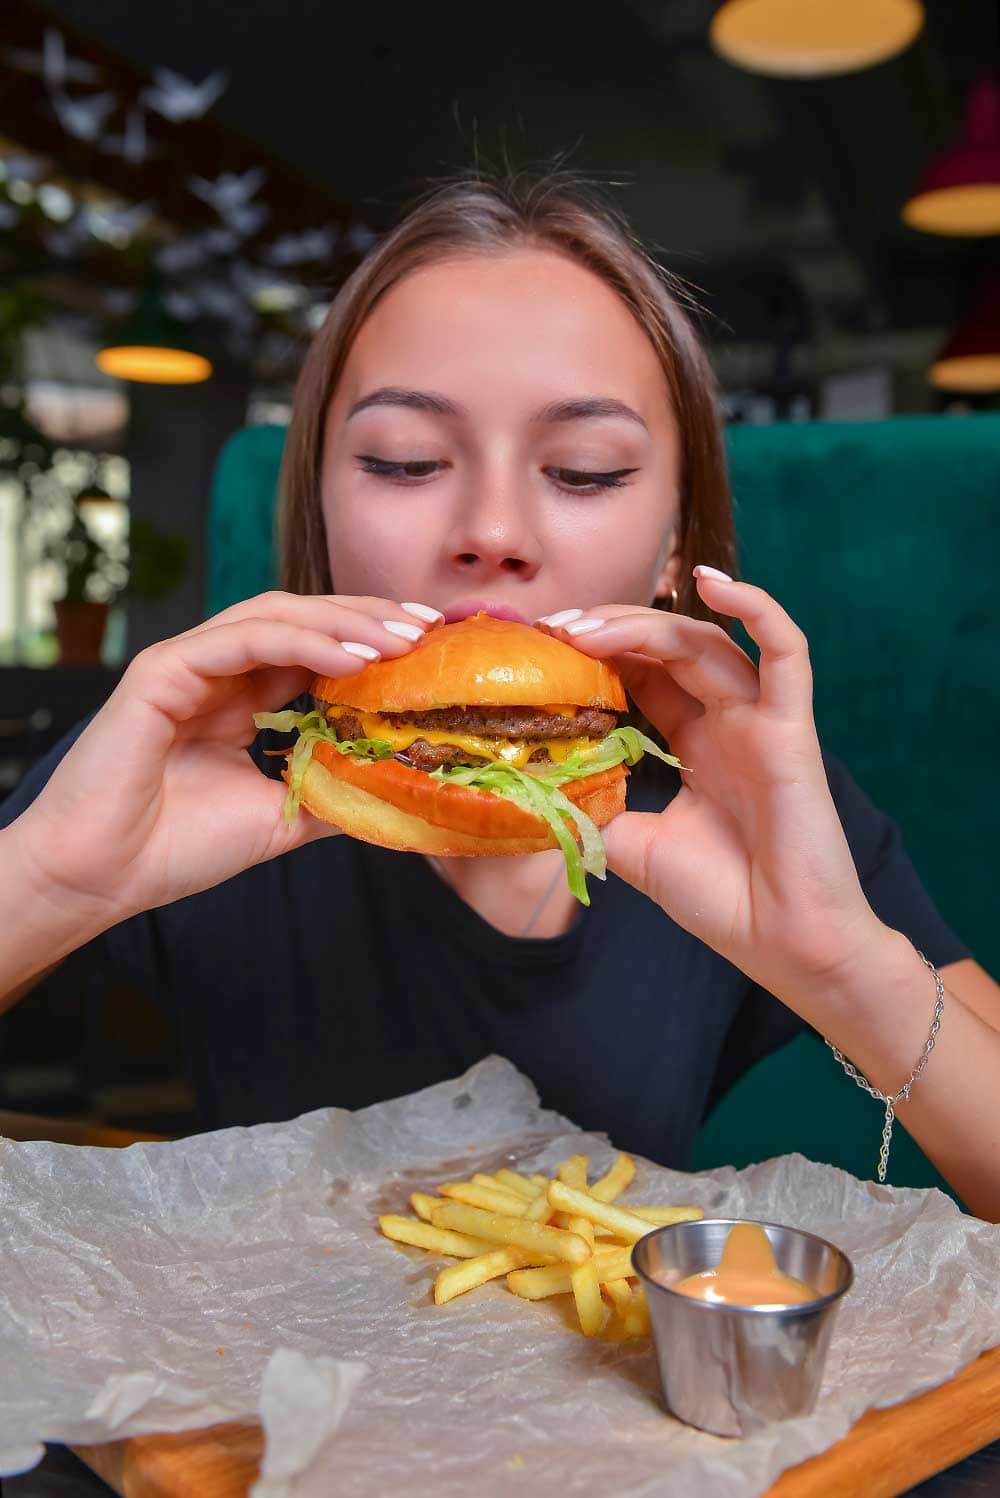 Woman eating burger and fries smiling